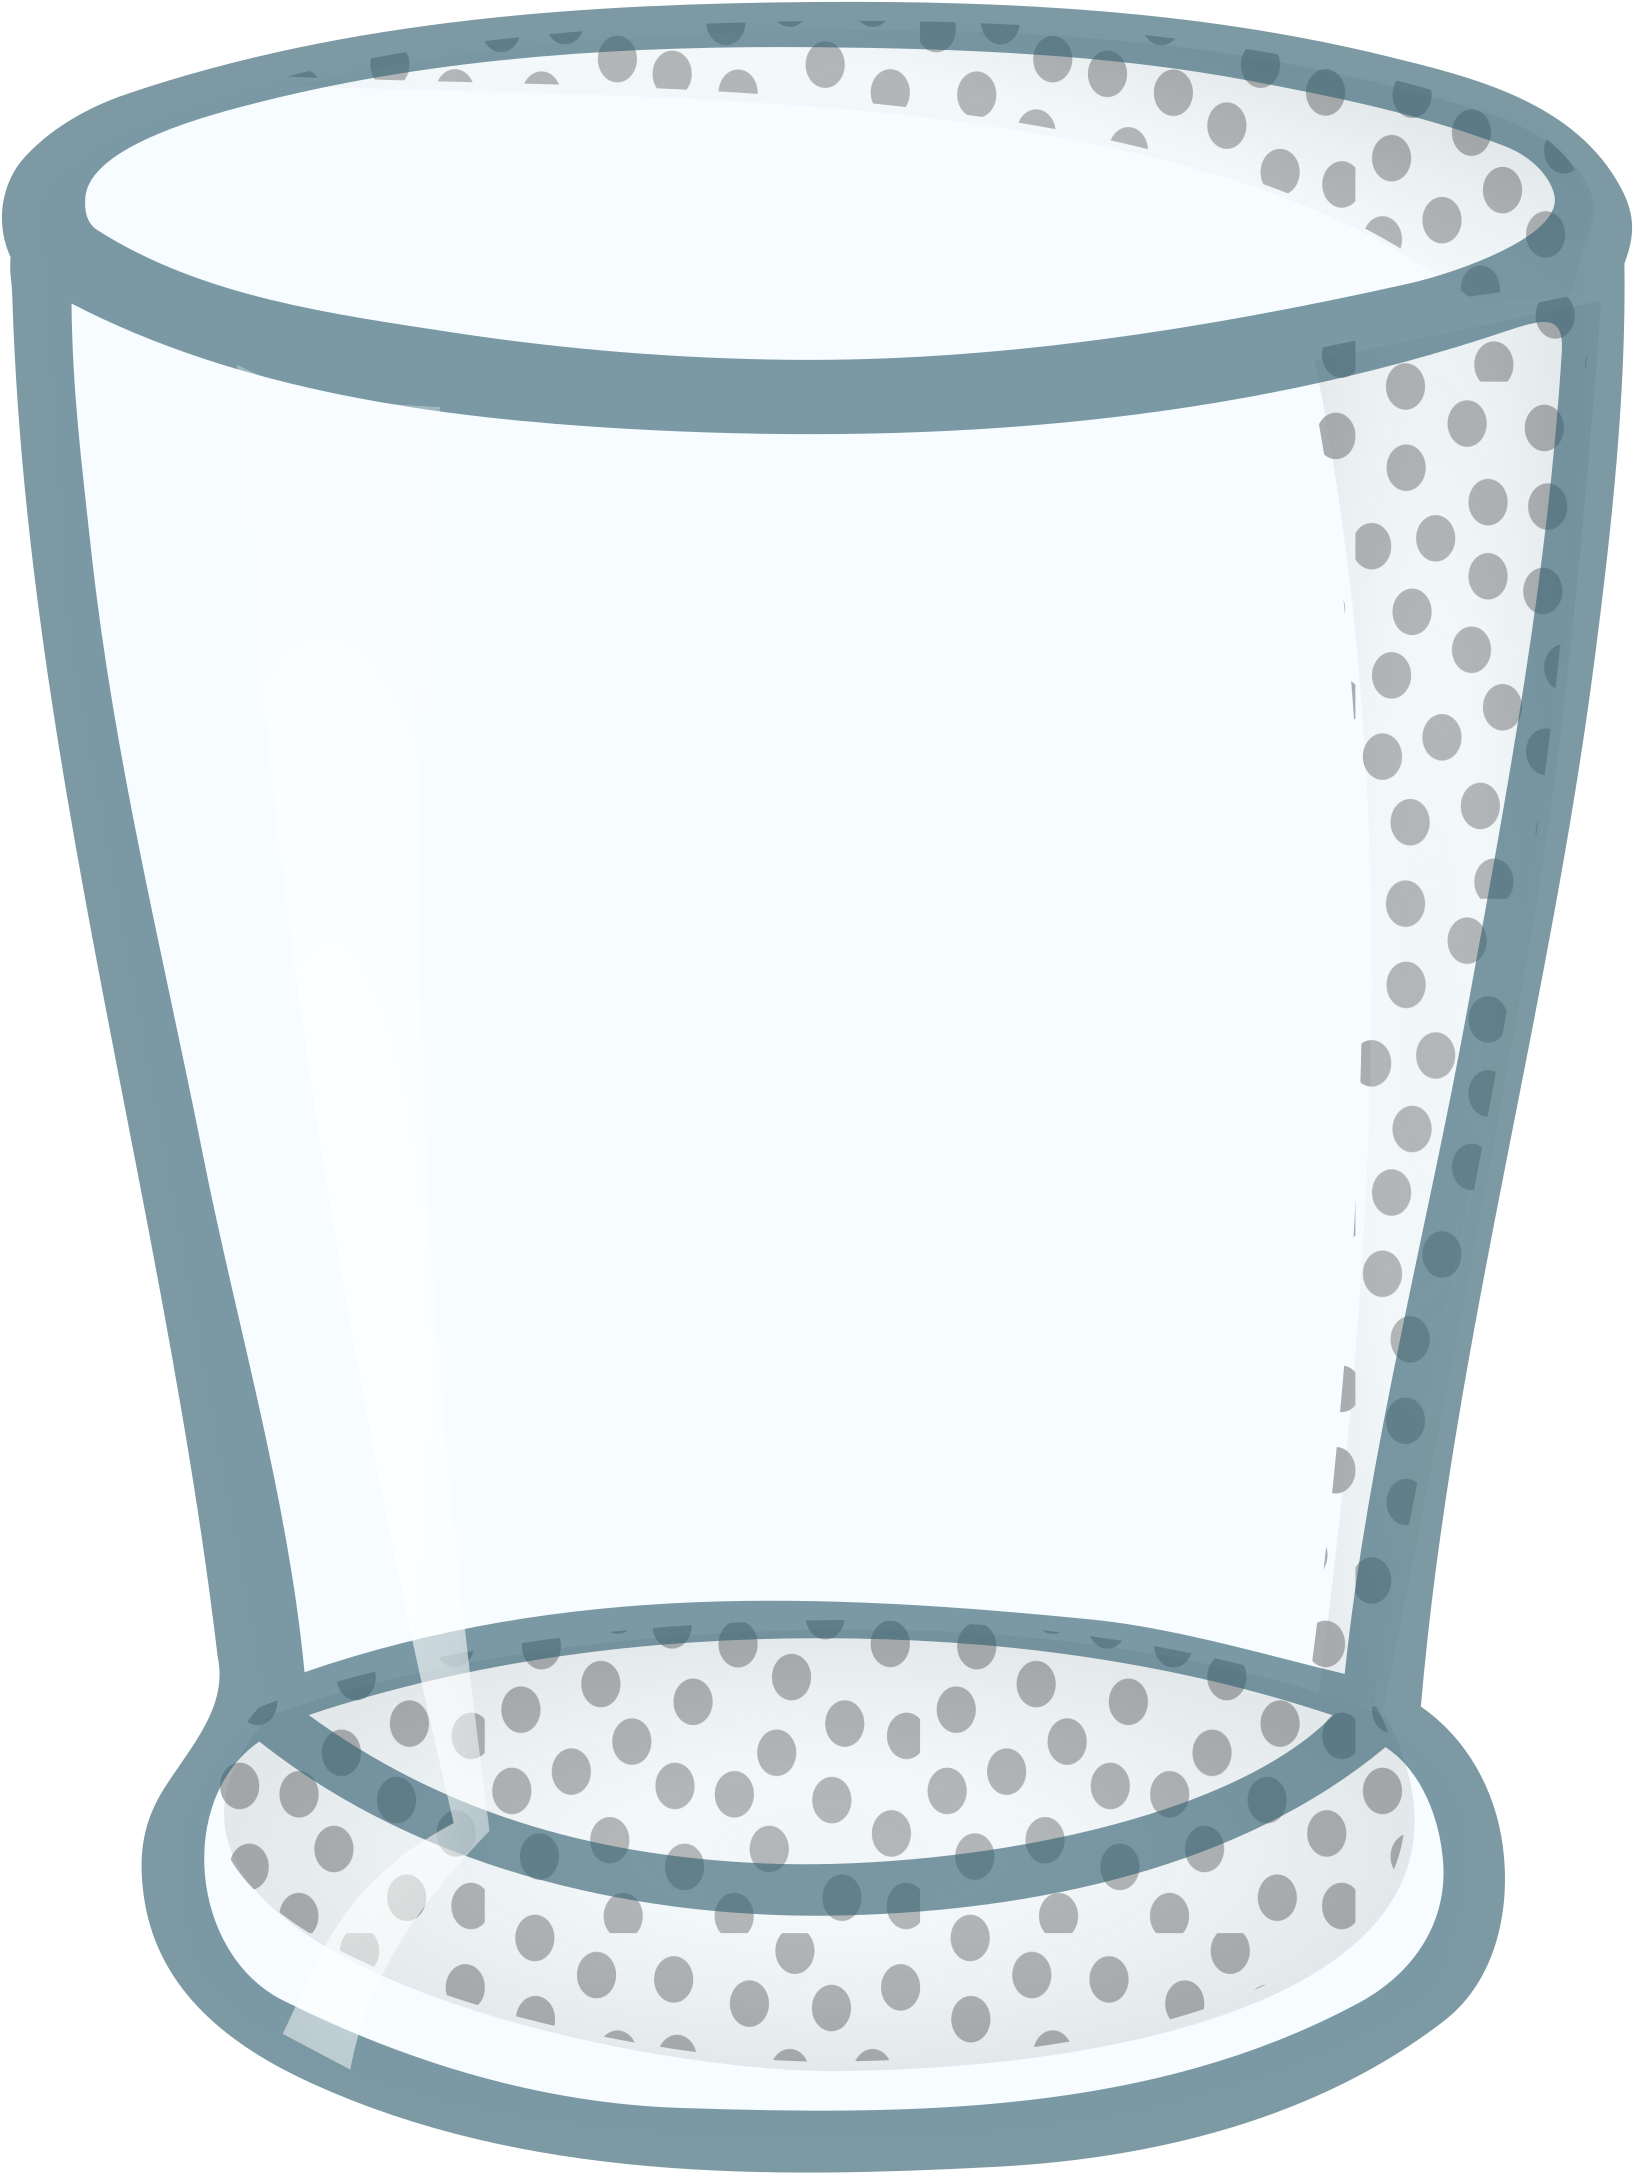 A Glass With A White Cap